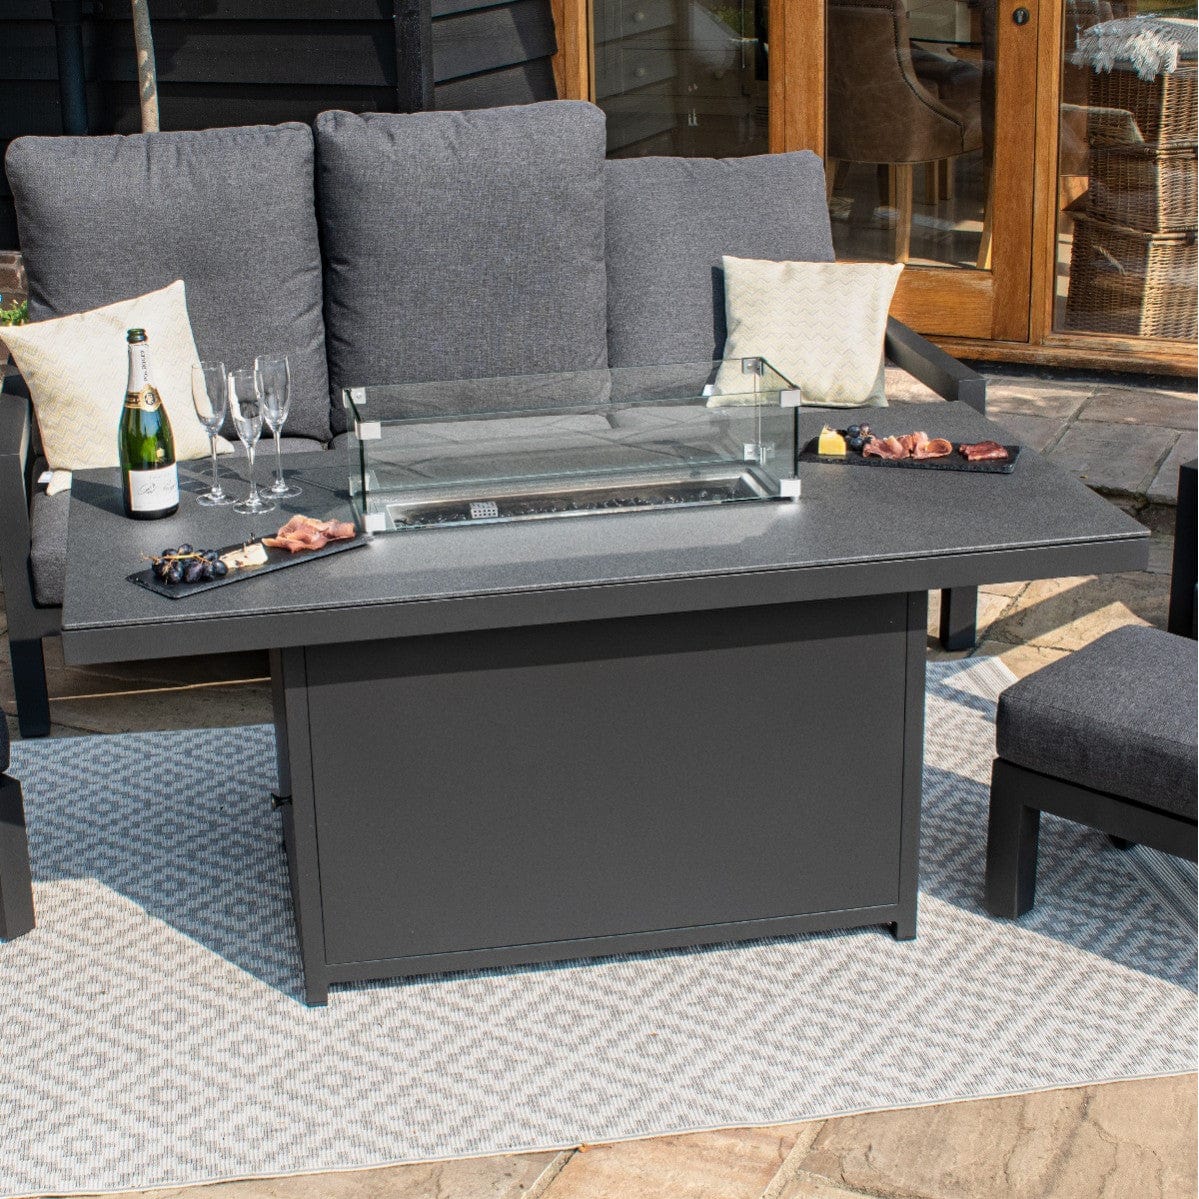 Maze Outdoors Aluminium Fire Pit Dining Table - Grey / Manhattan House of Isabella UK